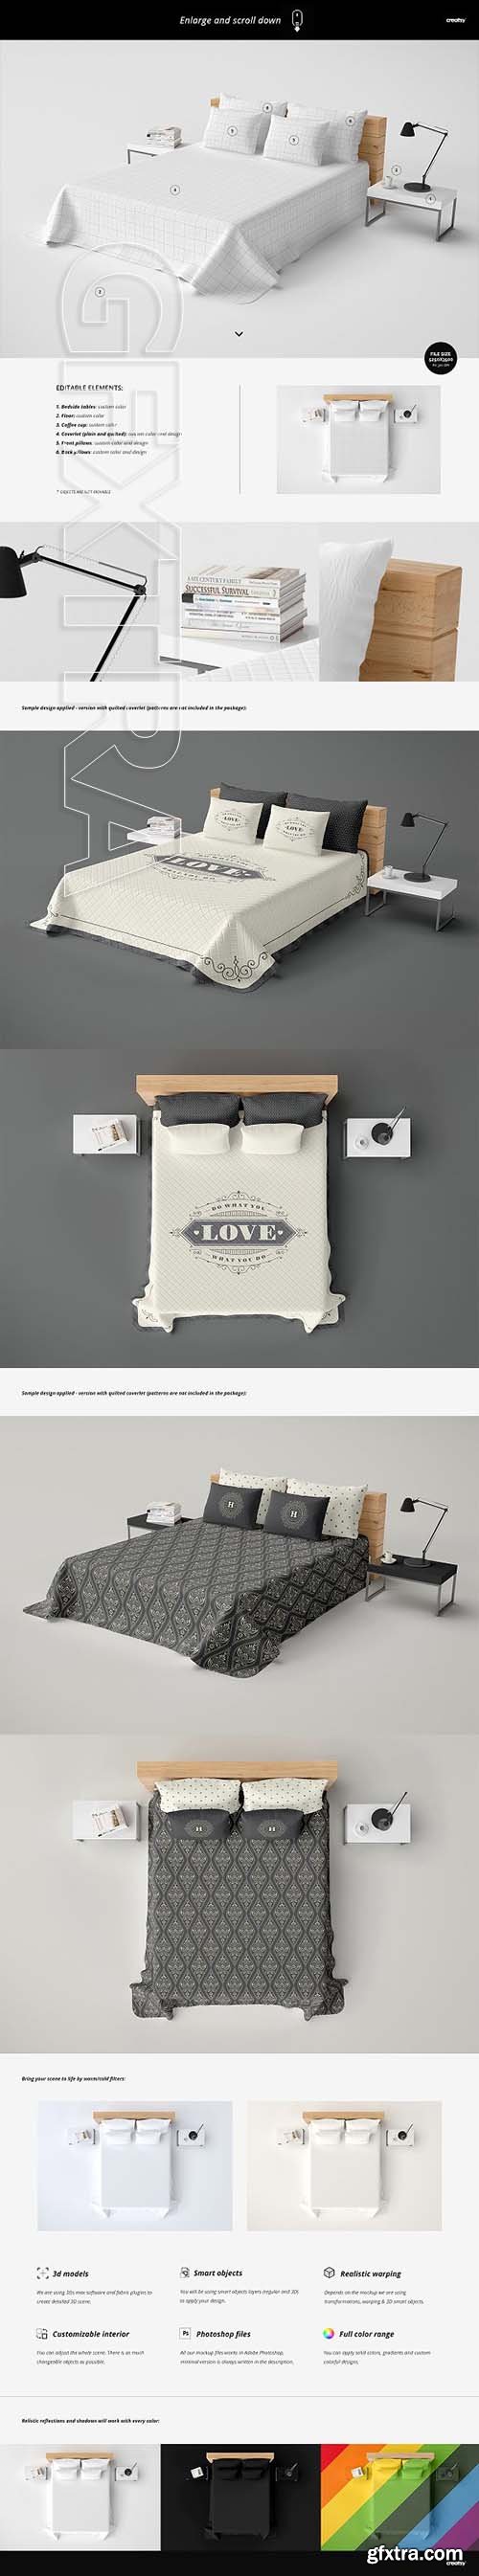 CreativeMarket - Bed Coverlet Plain & Quilted Mockup 2534839